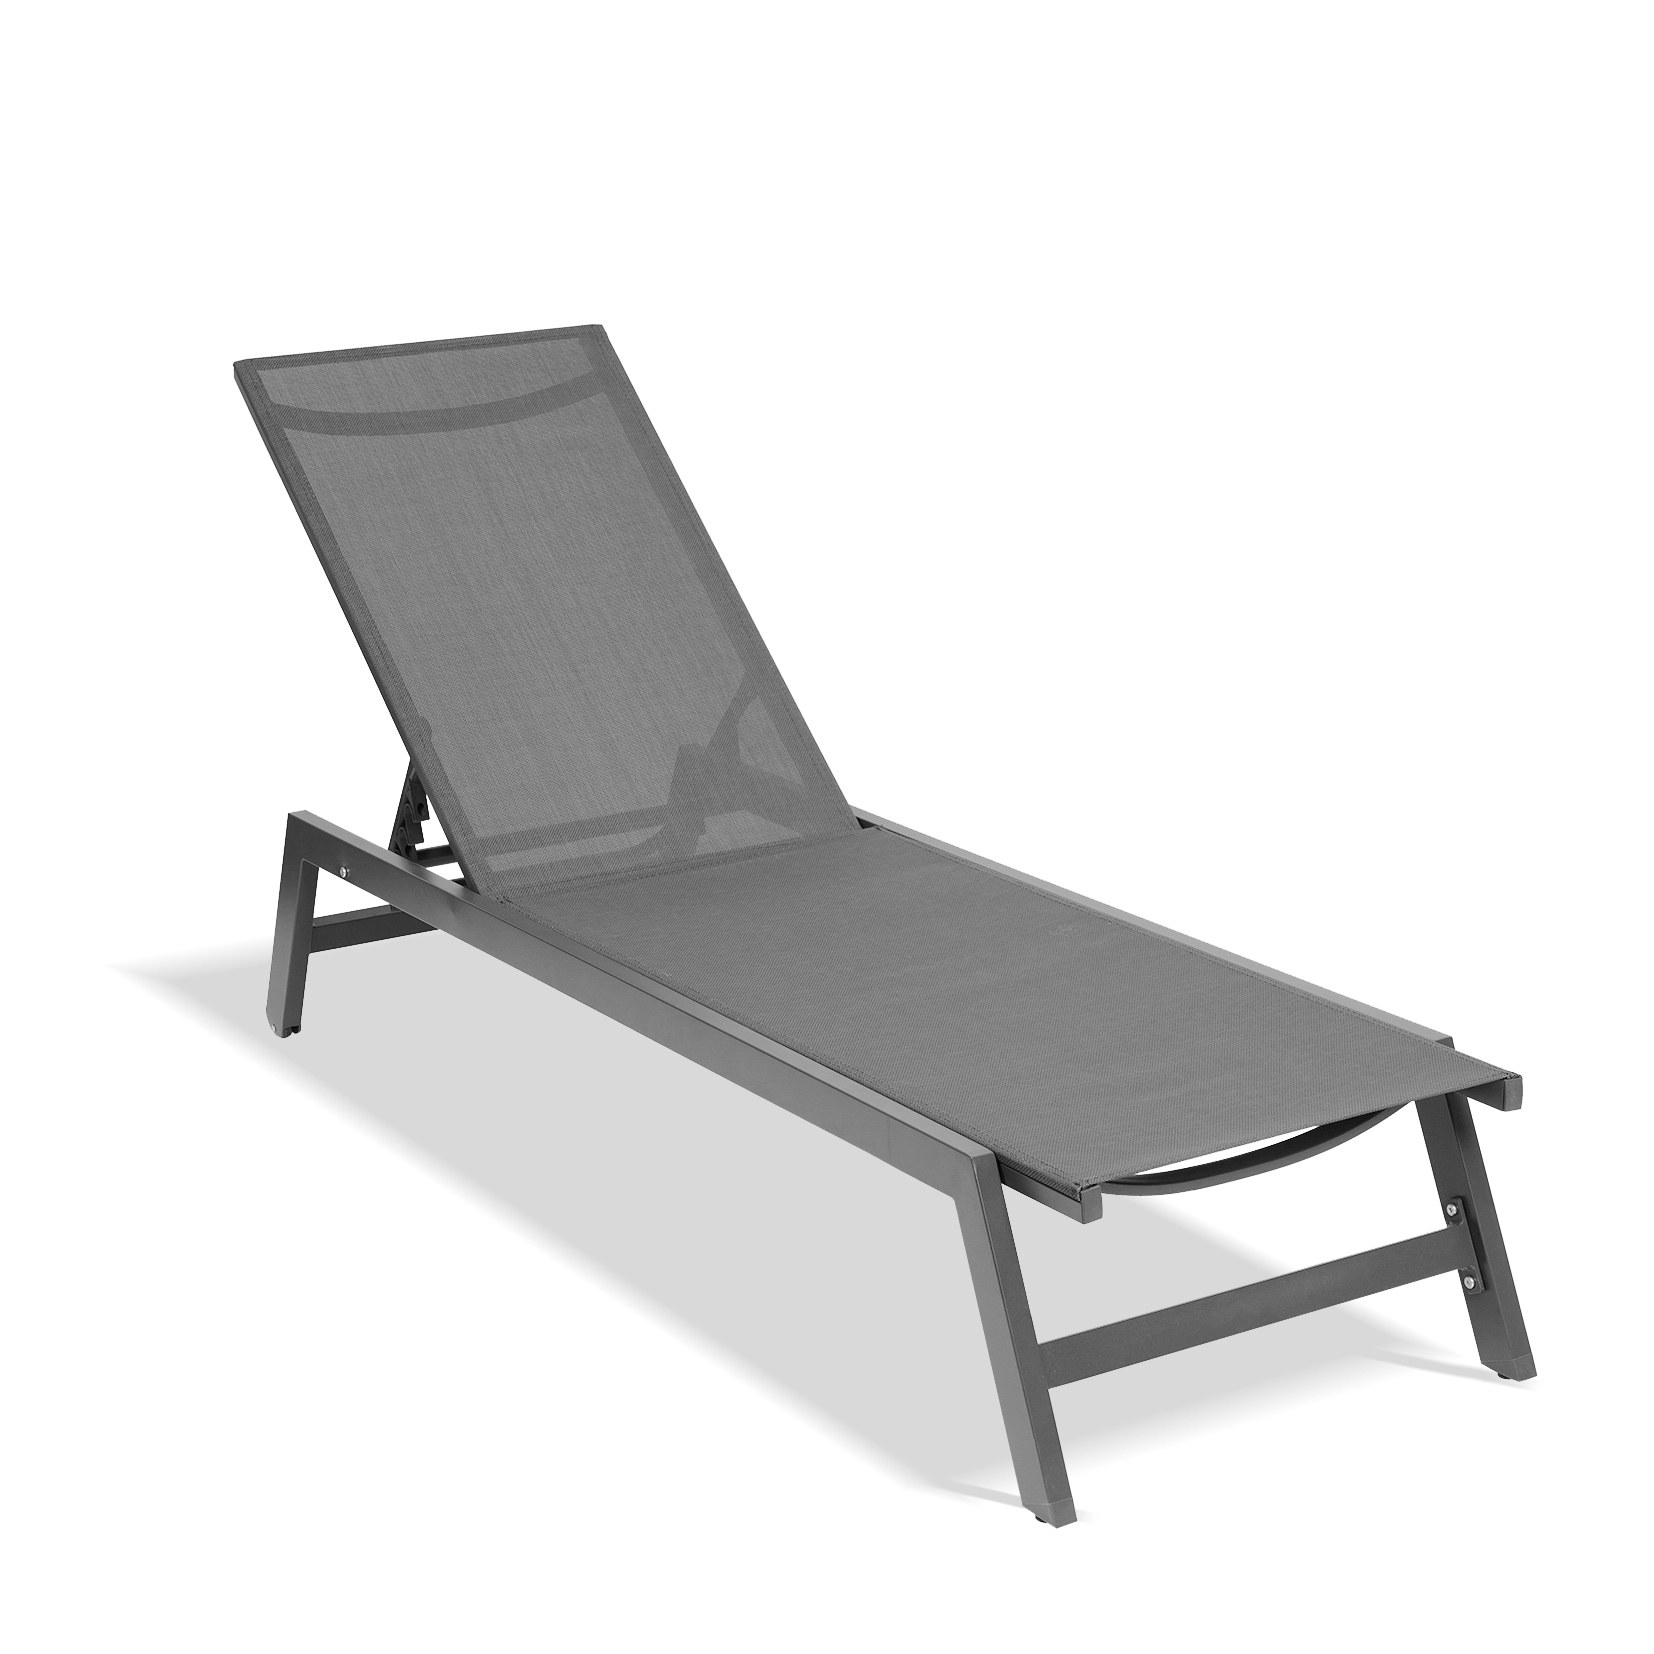 5-position Adjustable Aluminum Recliner  All-weather Seating For Patio  Beach  Yard  and Pool.